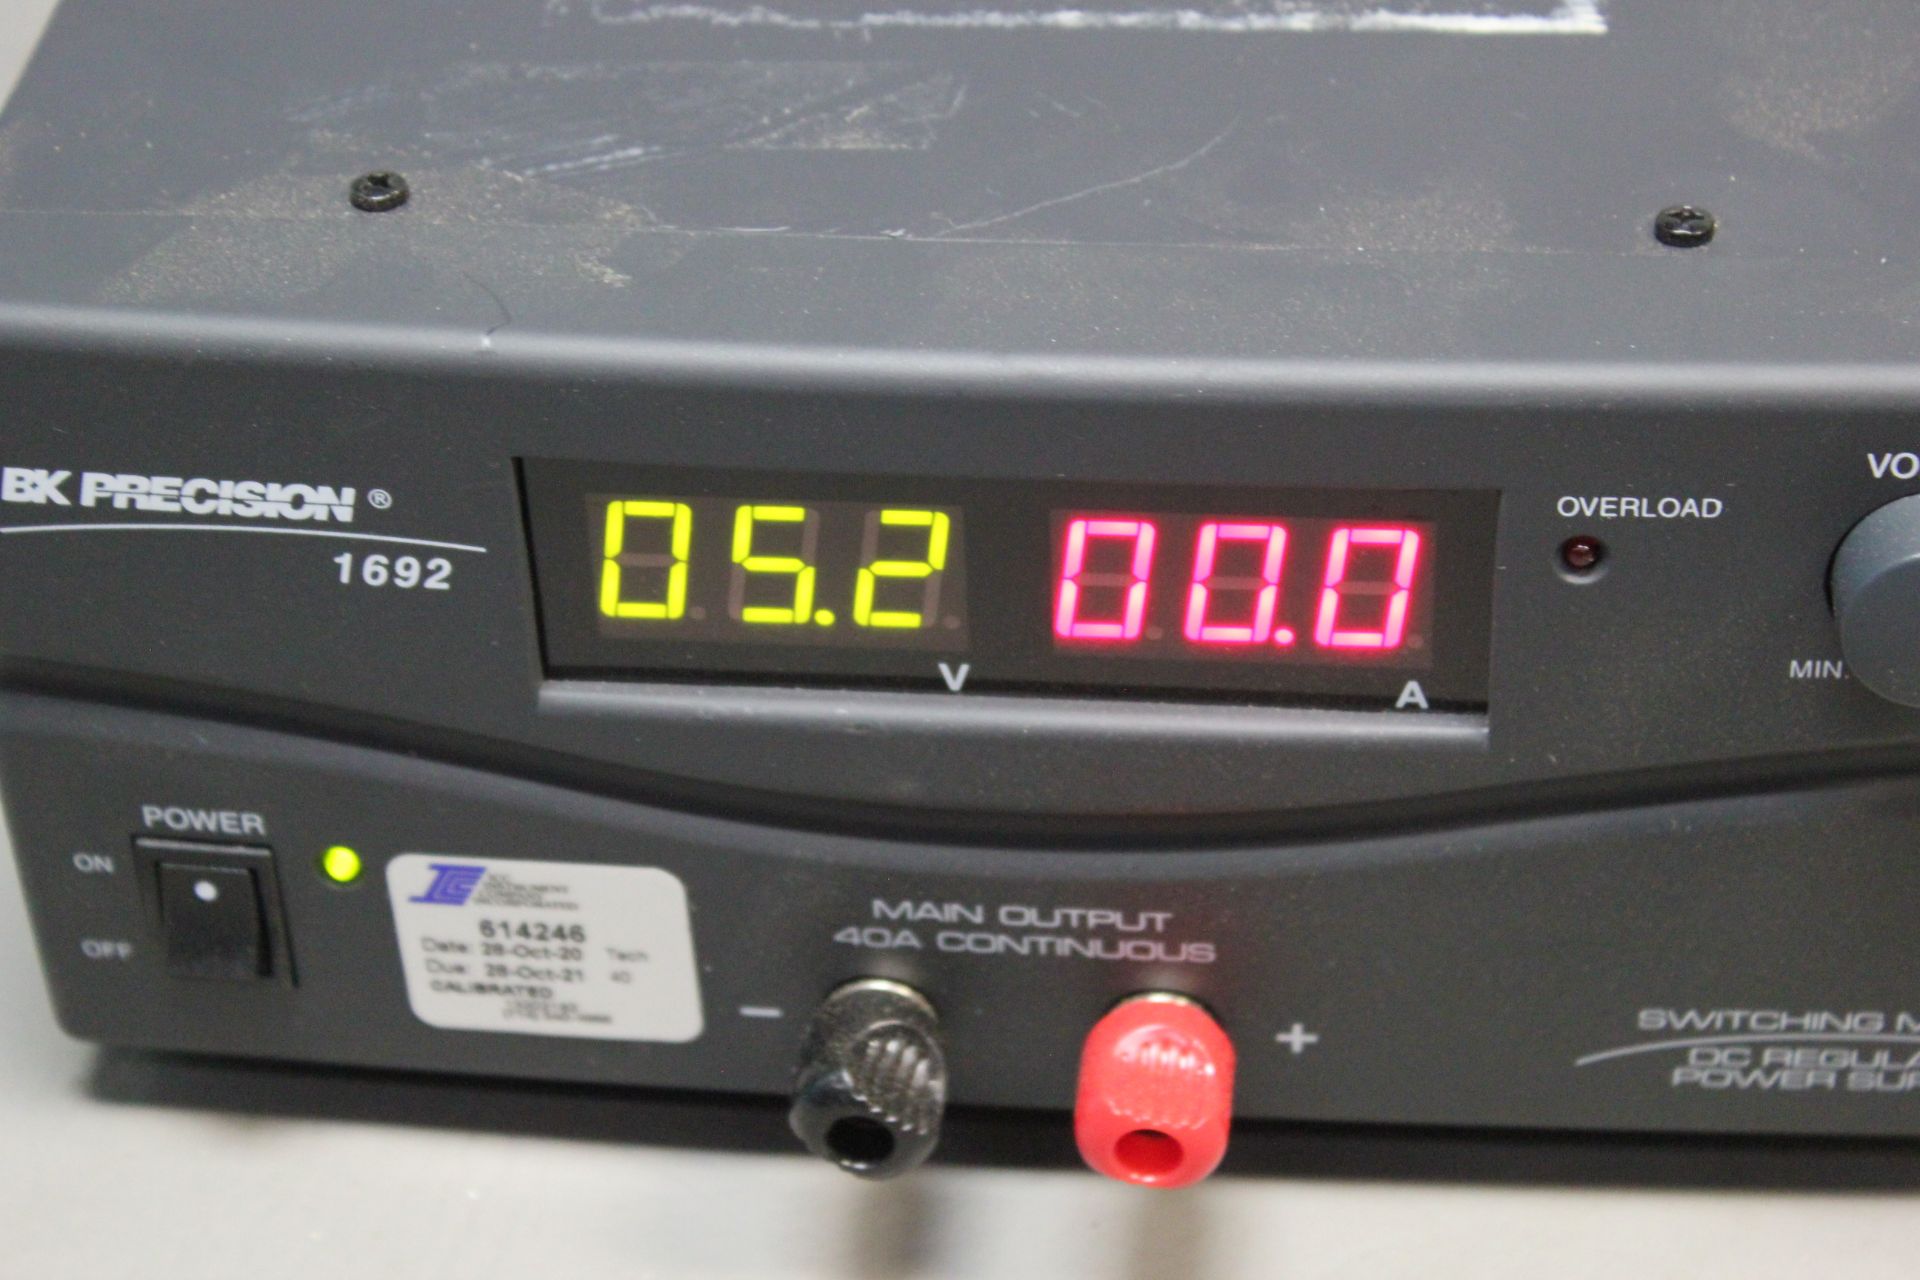 BK PRECISION DC REGULATED POWER SUPPLY - Image 6 of 6